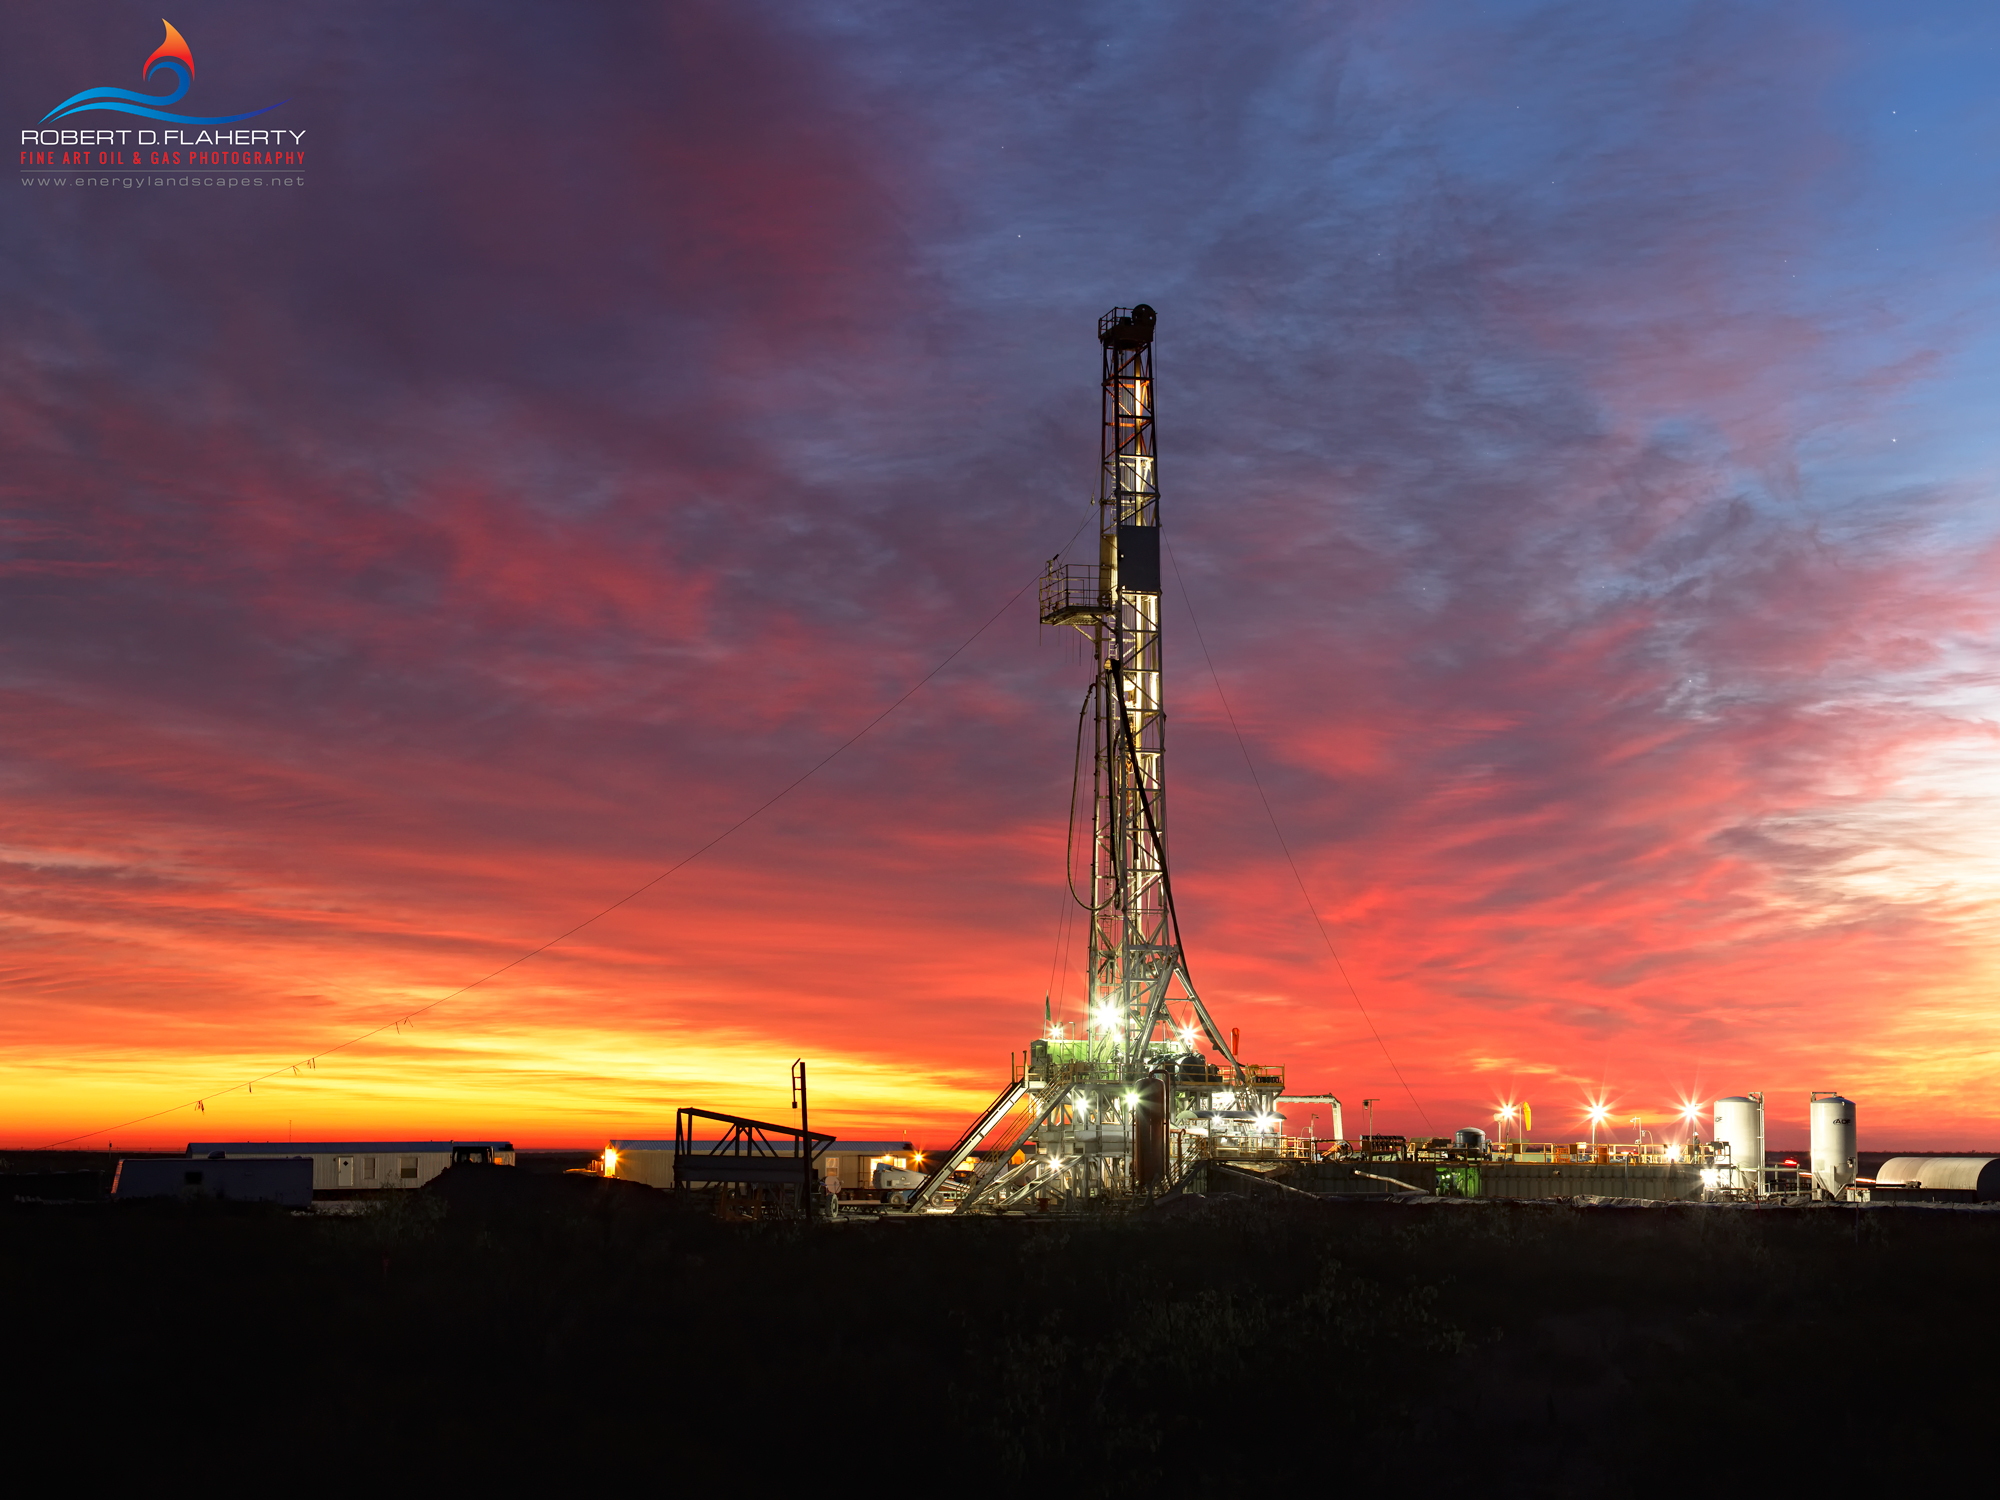 "Light Of A New Day" features Precision Drilling  Rig  573 drilling a lateral well near Barstow Texas in early April 2014. The...